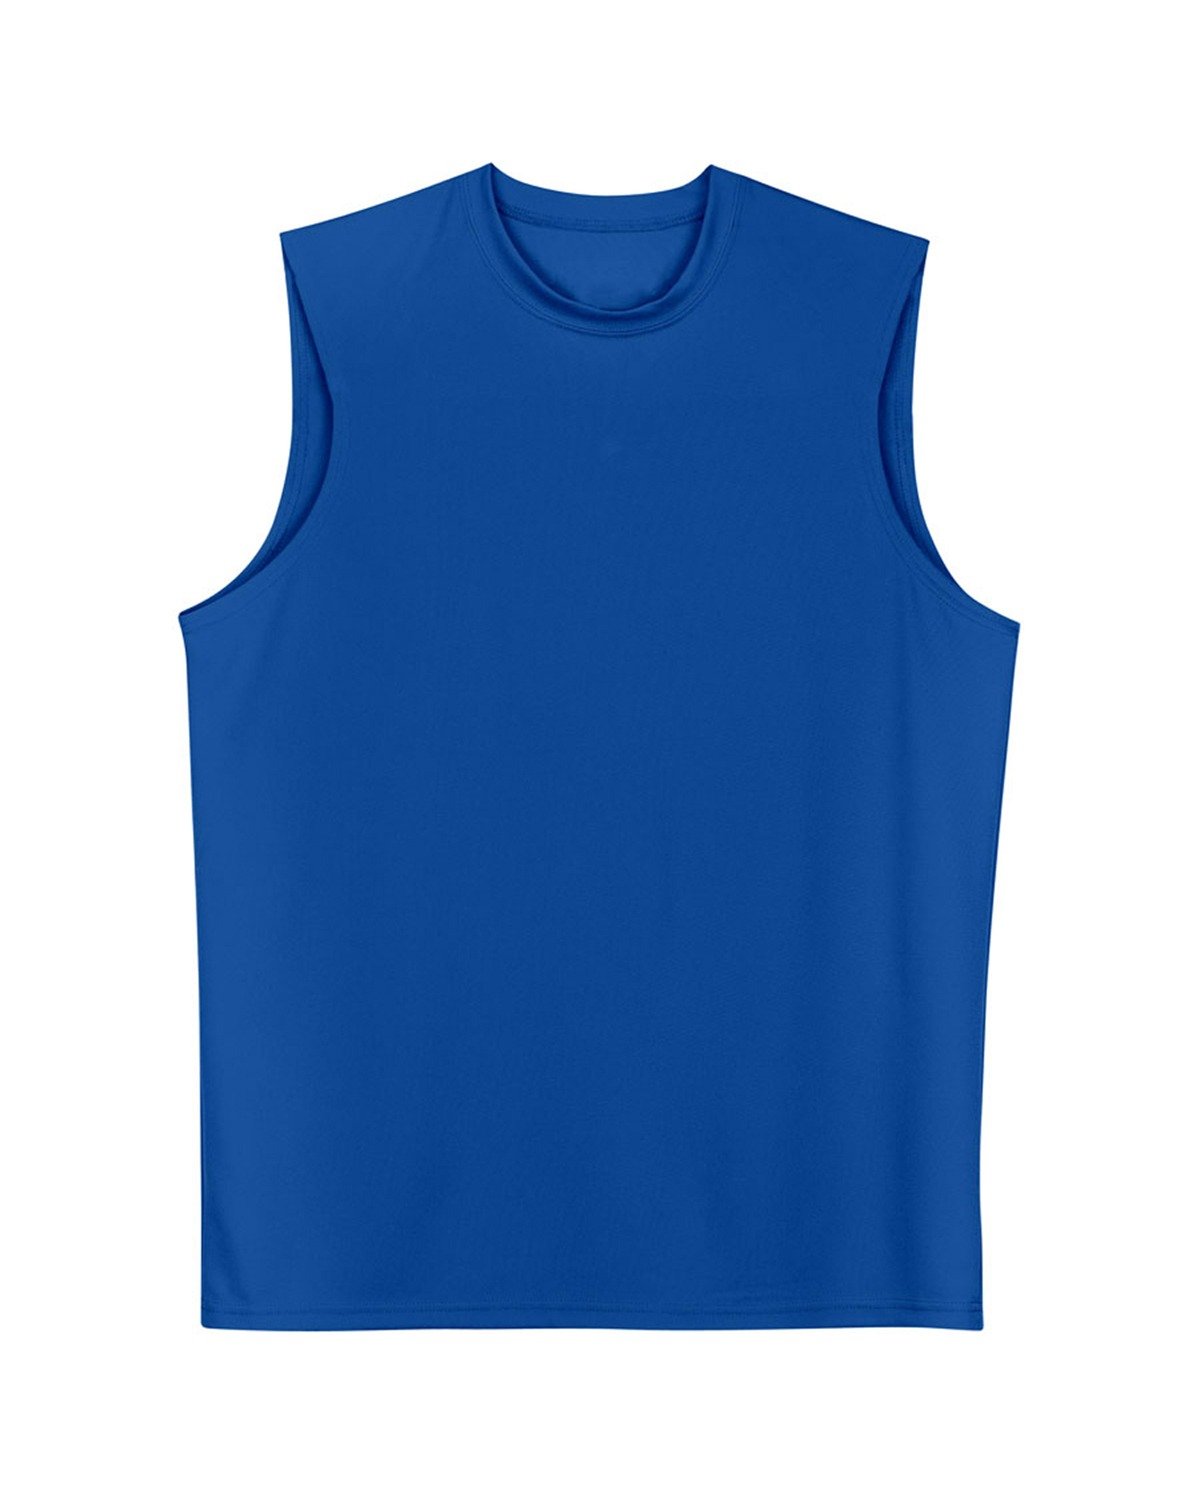 Blue muscle tee Front view.